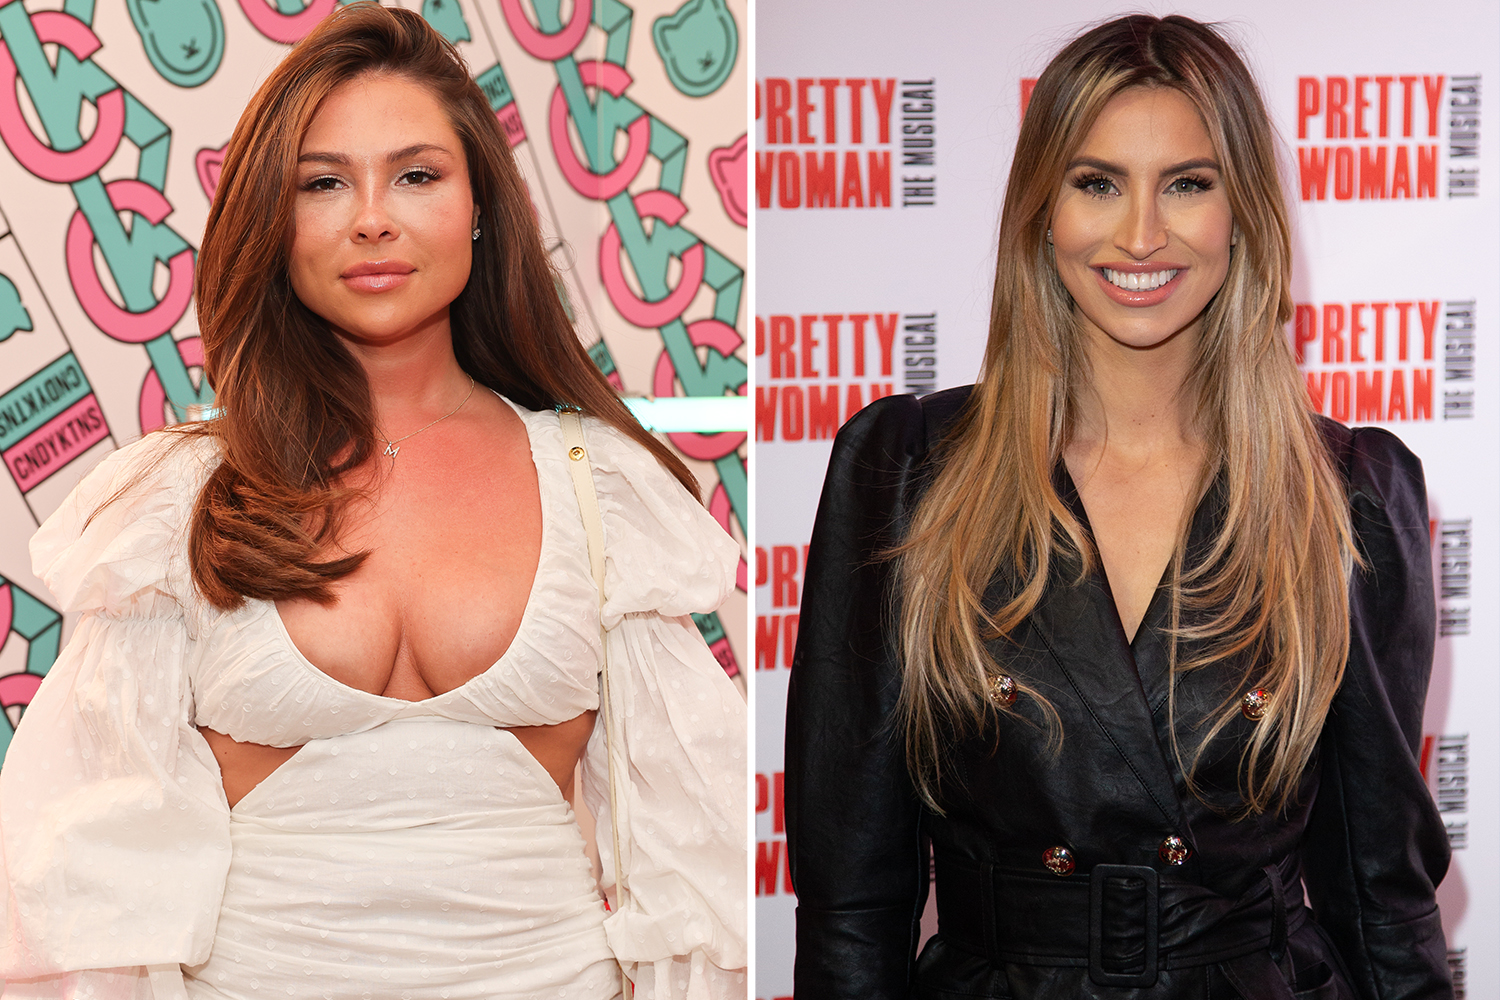 Towie’s Fran Parman attacks Ferne McCann calling her ‘vile, disgusting and shocking’ amid Sam Faiers drama